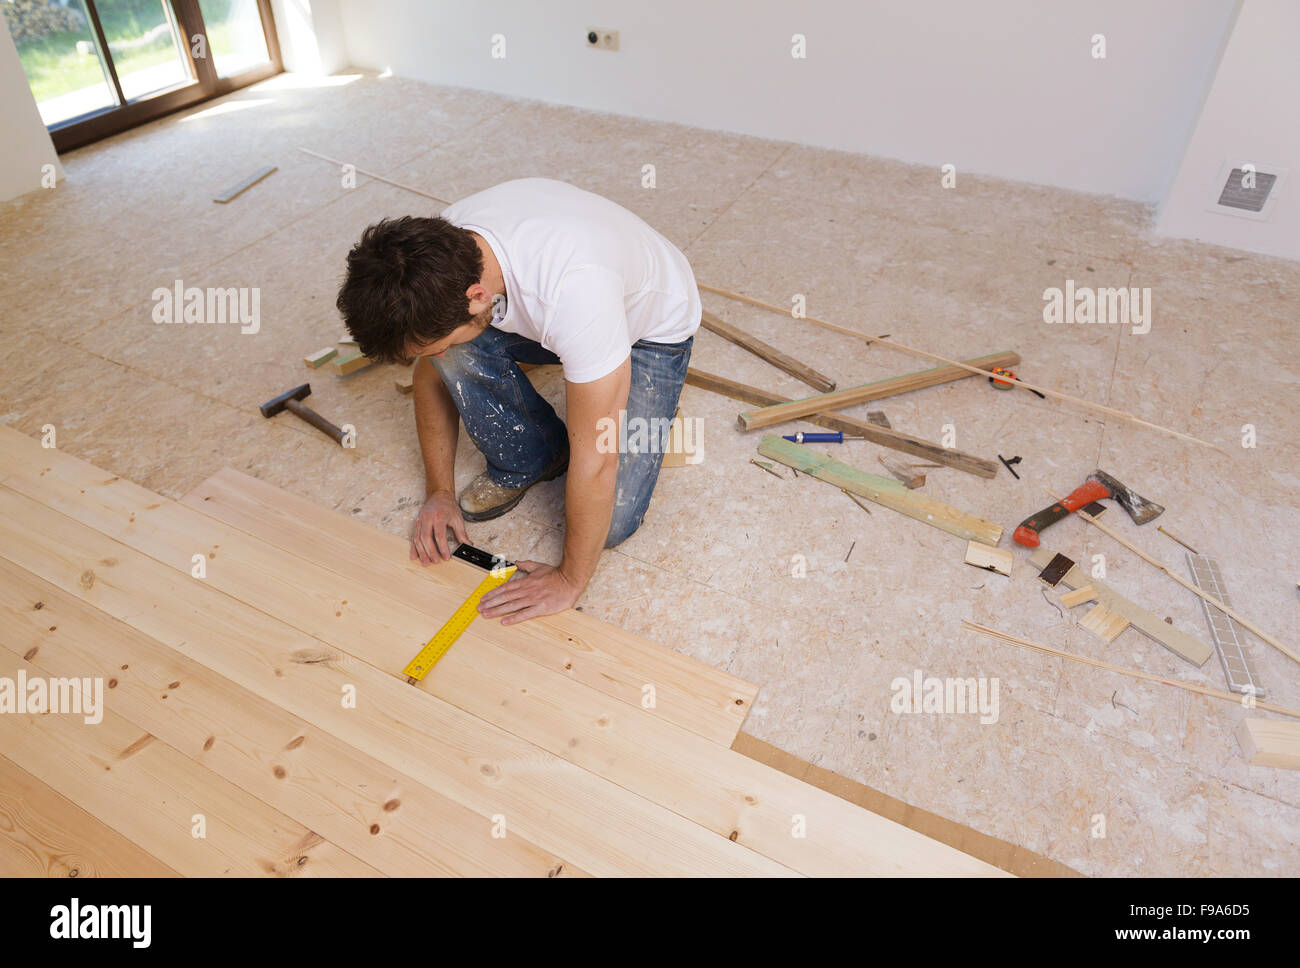 Man measuring wood flooring in new house Stock Photo